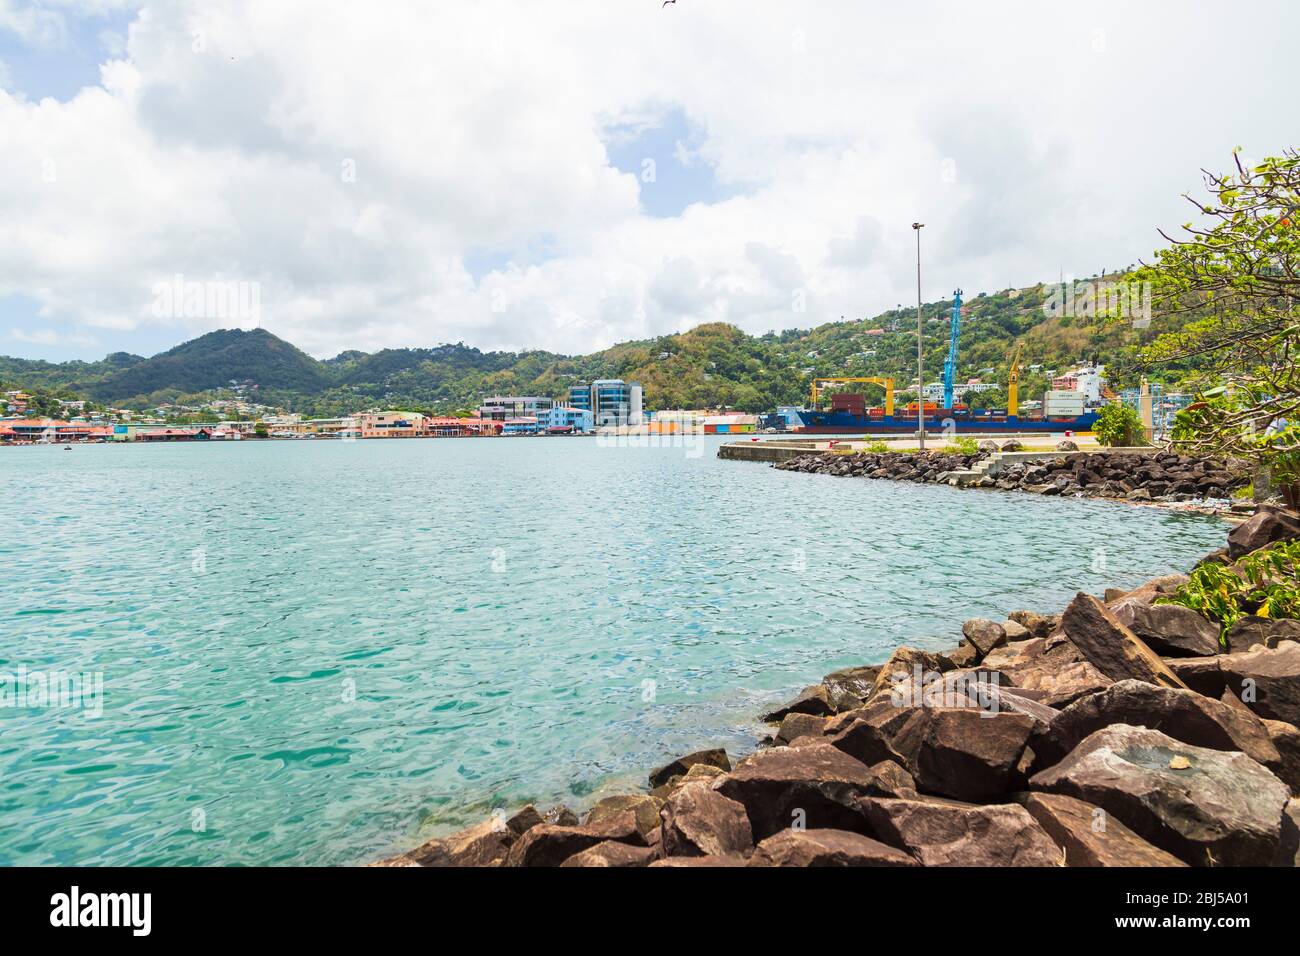 Castries, Saint Lucia - April 15 2020 : the Castries harbor surrounded by rocks on the right and hills in the far off distance Stock Photo